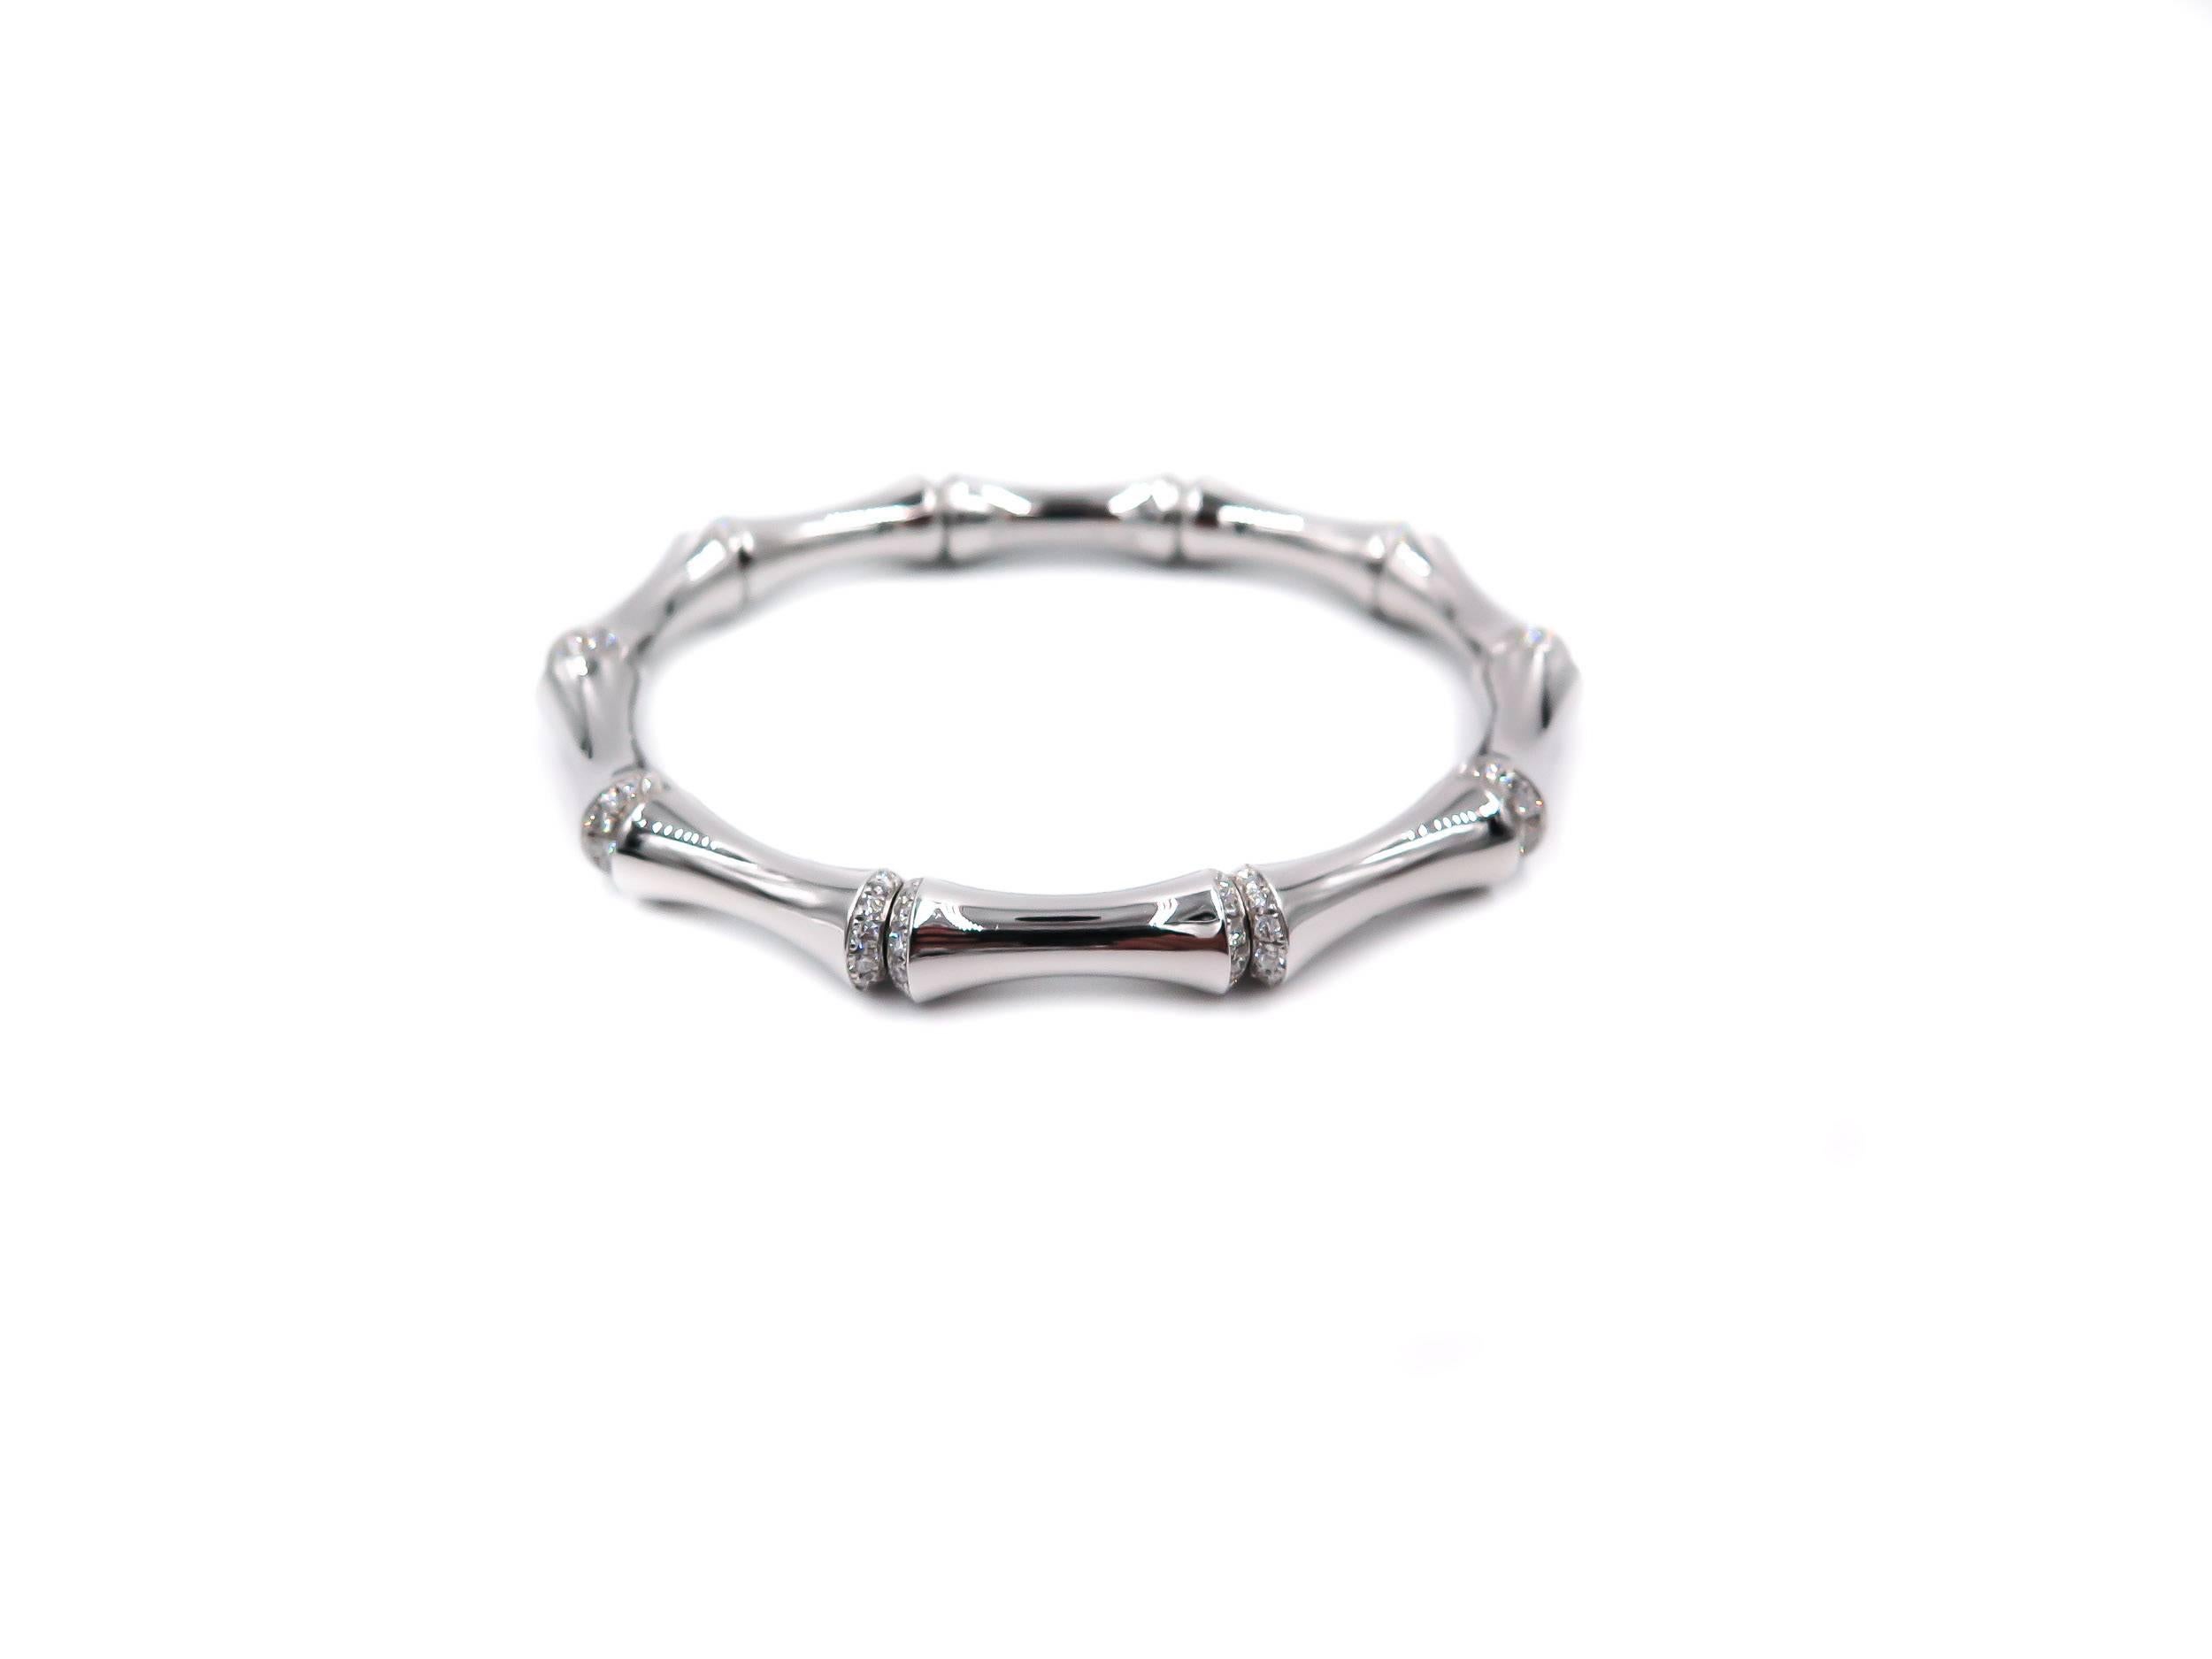 This bamboo inspired white gold and diamond bangle by Gucci is the perfect summer accessory. As versatile as it is appealing, it can be the perfect compliment to any other favorite bracelets or a statement piece in its own right. This bracelet is a